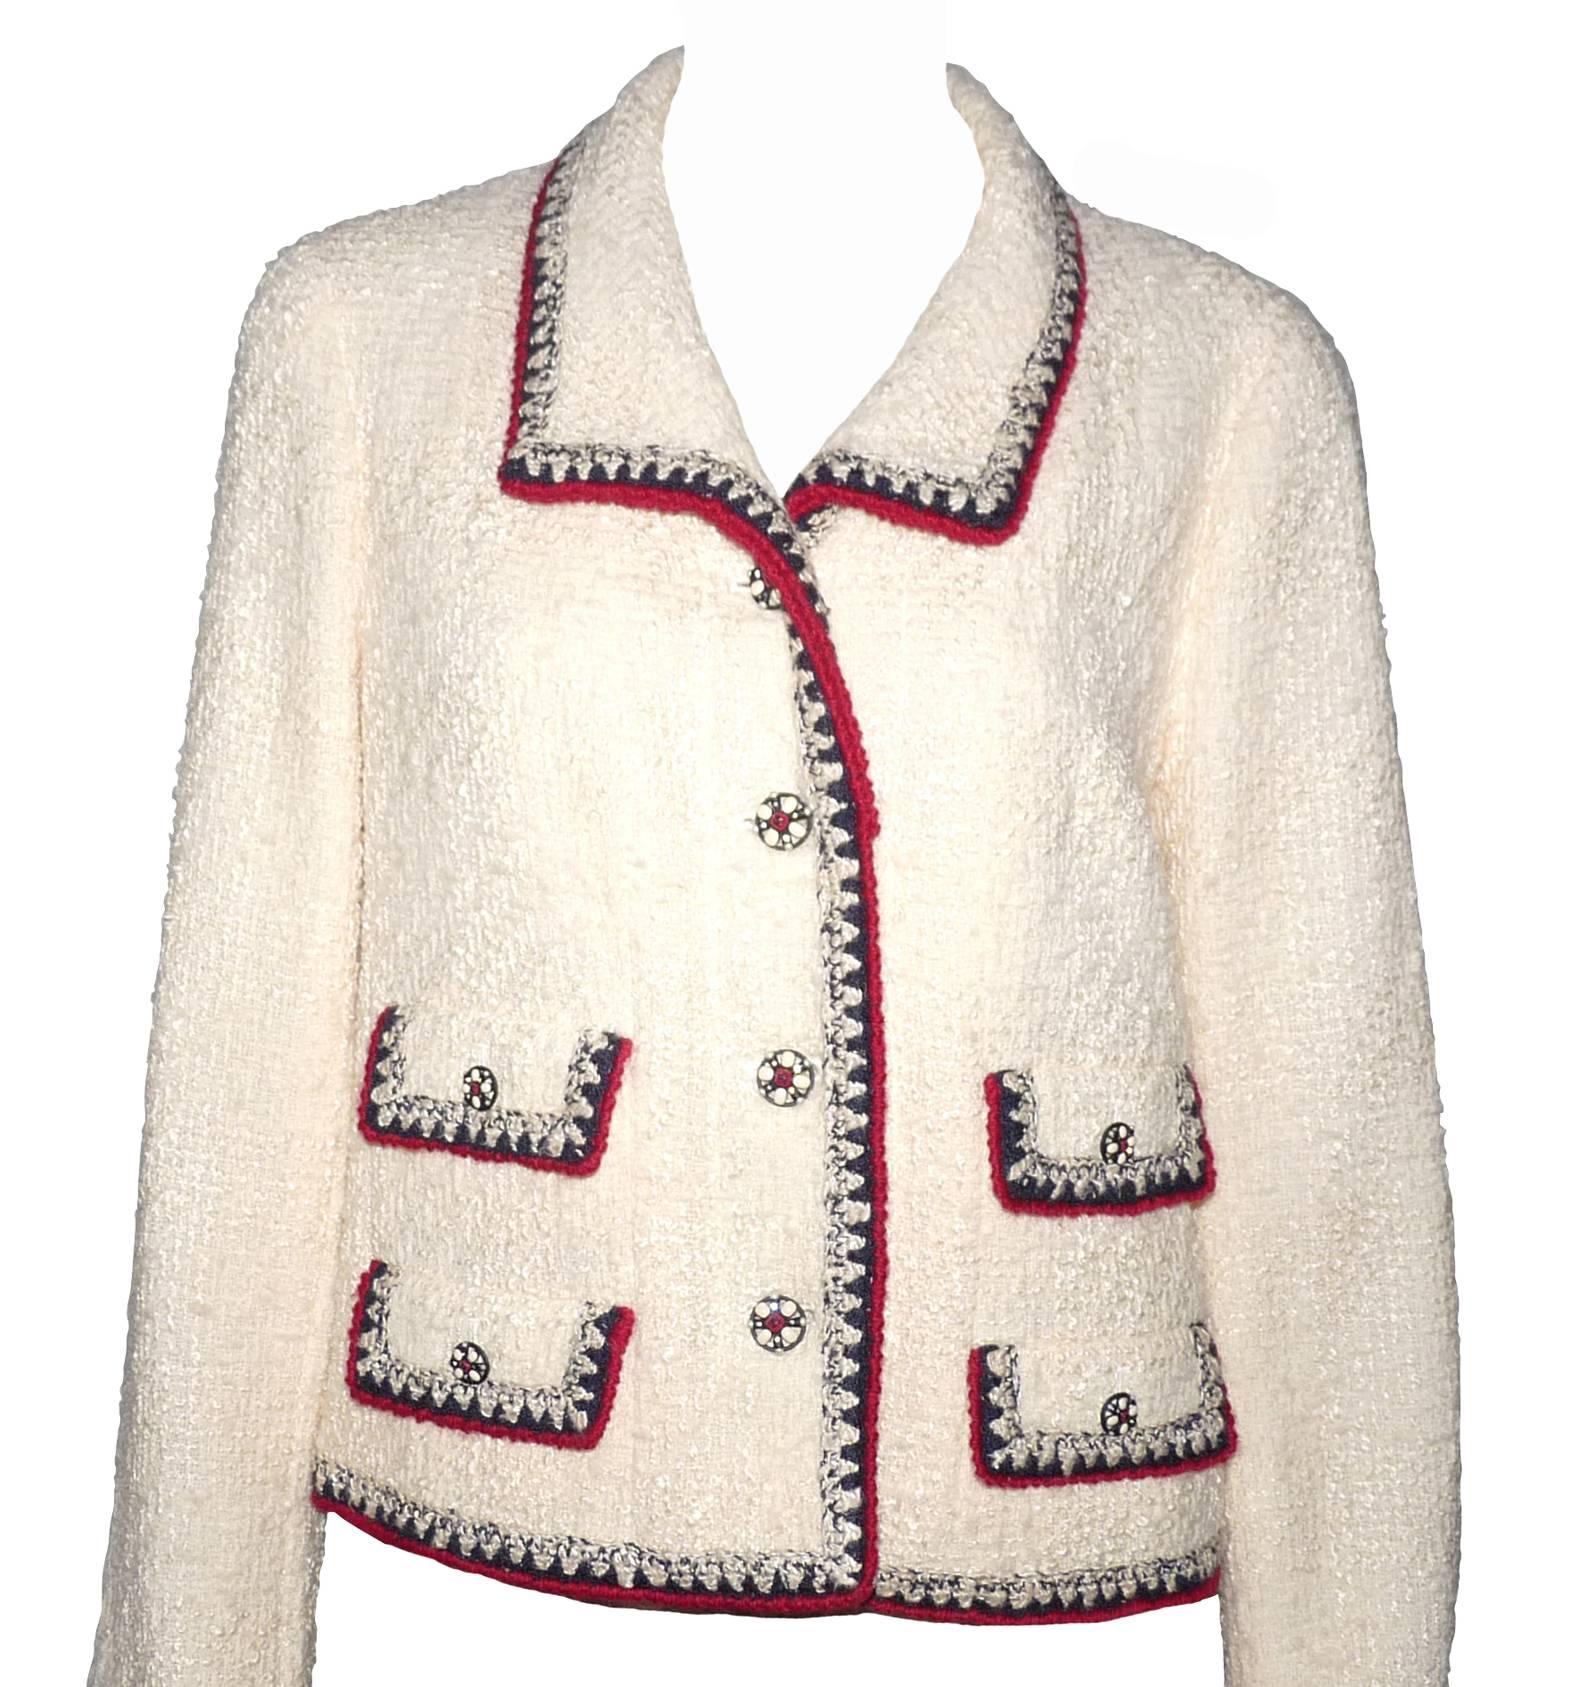 EXCEPTIONAL Chanel Jacket 
Tweed woven cream colored with navy and red woven.
Engraved metallic and enamel pearls and CC logo
4 small pockets.
Removable cuffs in navy cotton.
Ivory camellia stretch silk lining
Composition: 80% wool, 8% silk, 8%